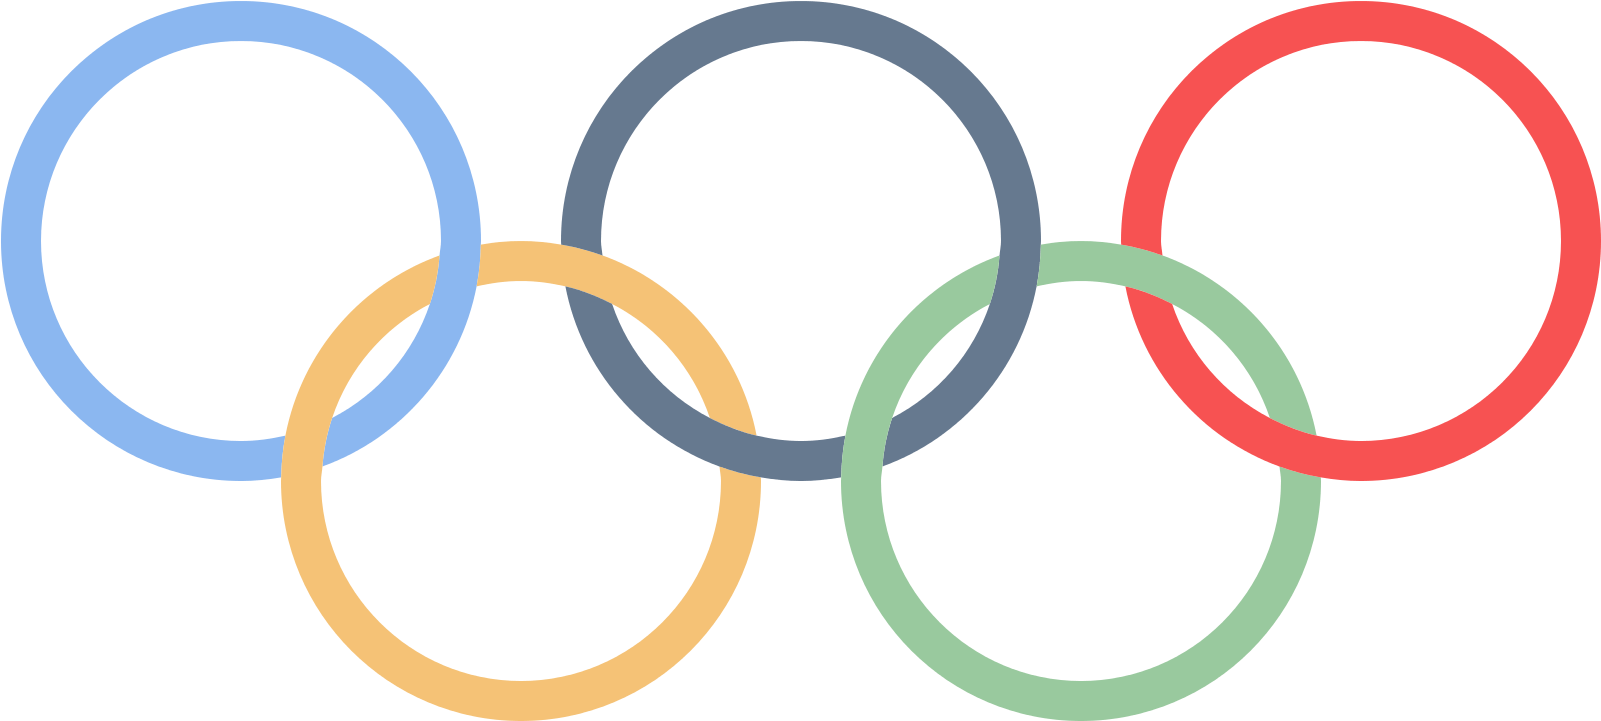 Olympic Rings Clip Art - South African Sports Confederation And Olympic Committee (1601x721)